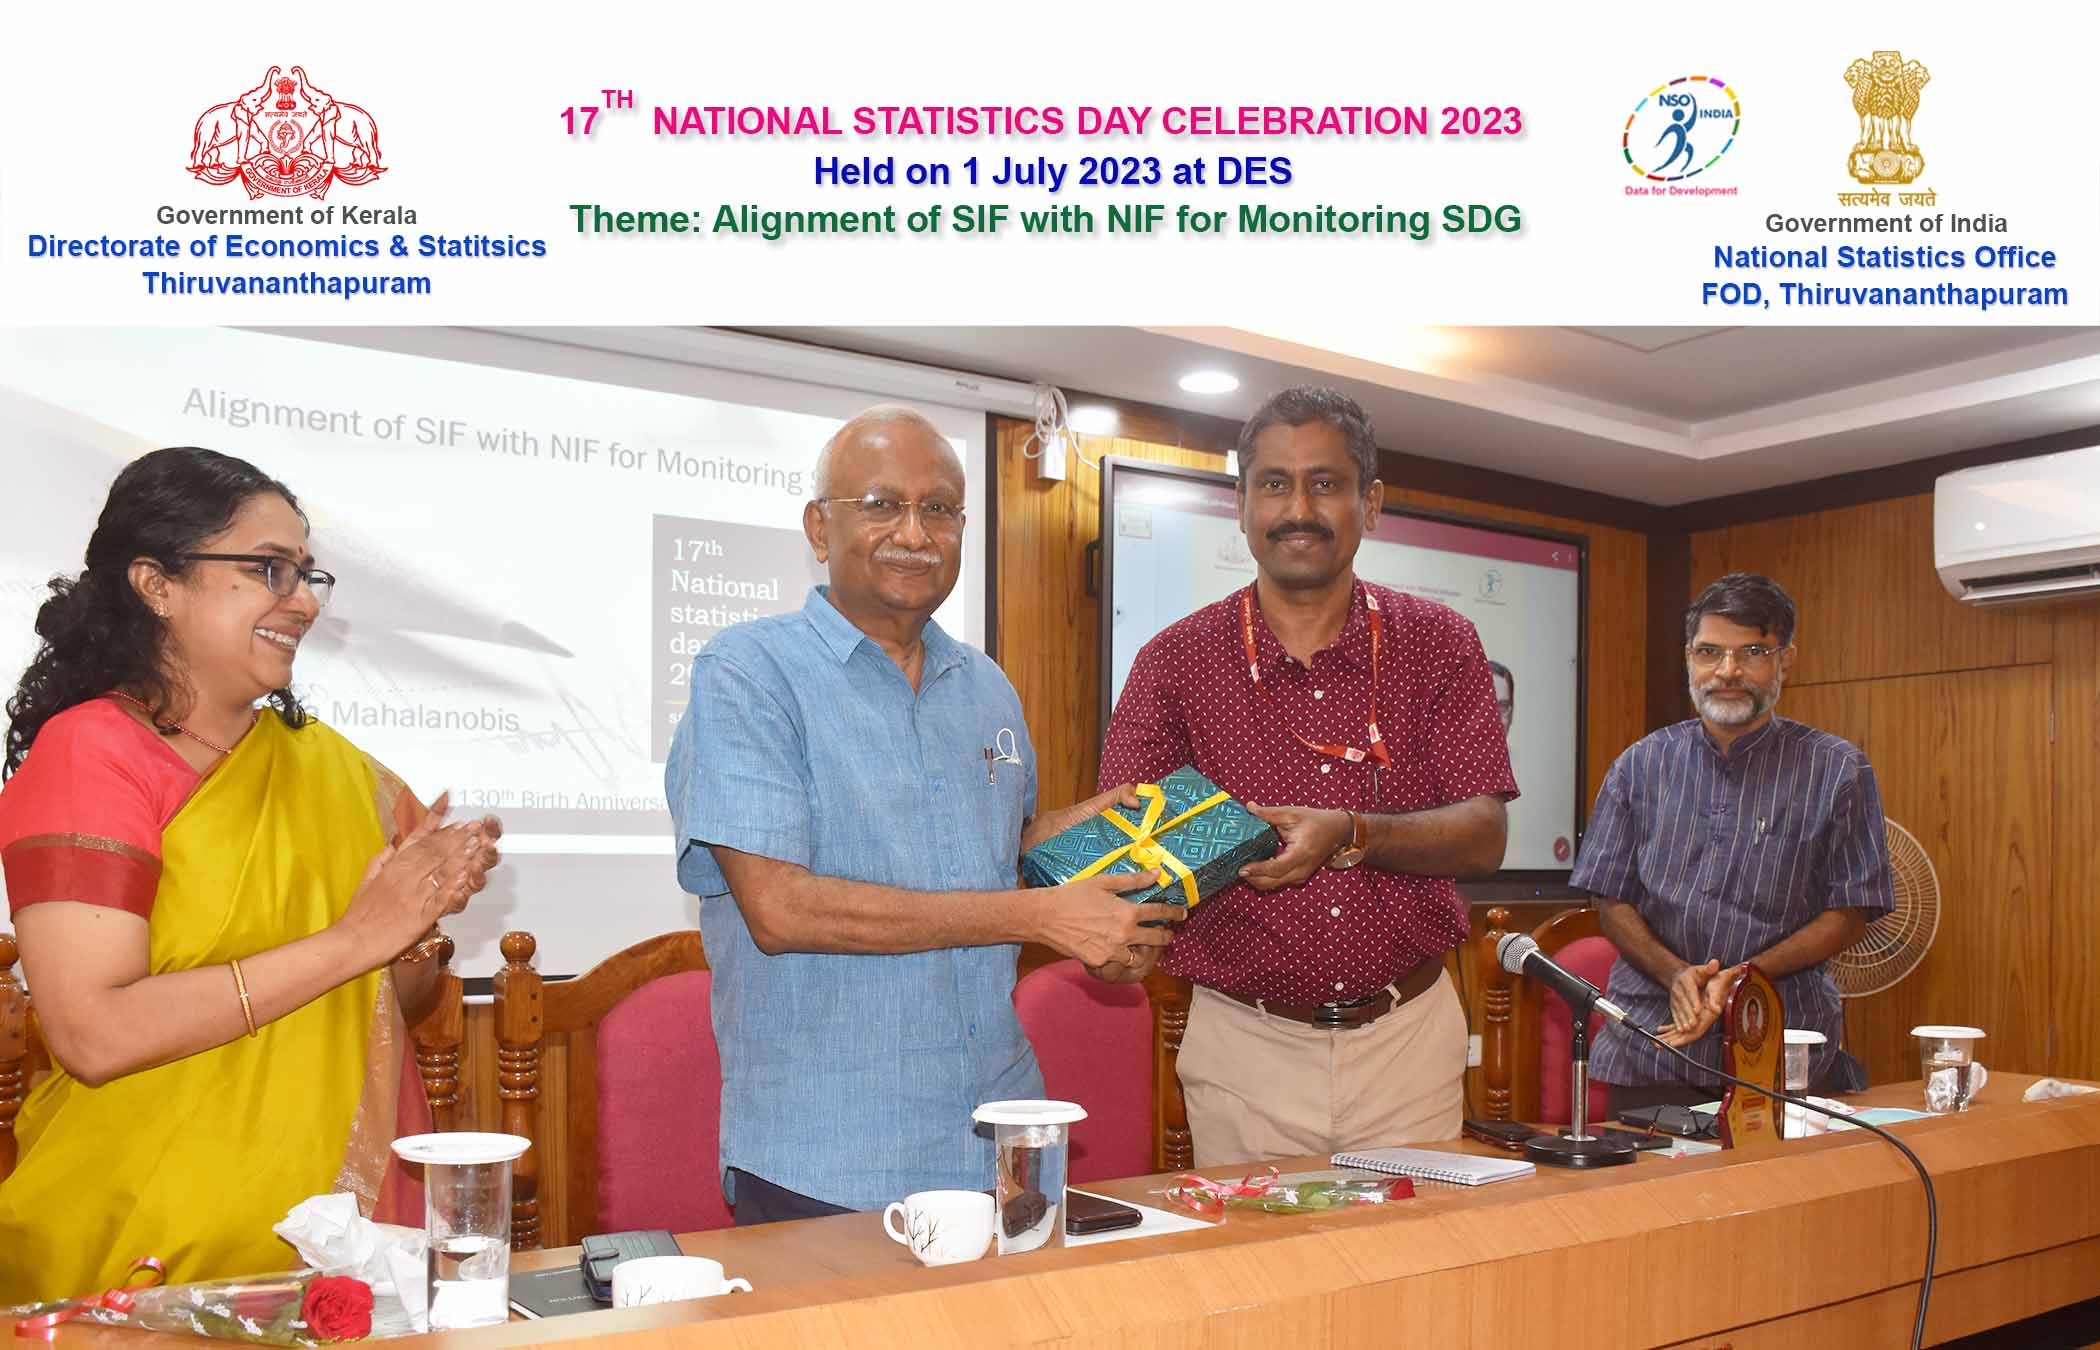 Presenting a gift to Sri. S M Vijayanand as a token of honour